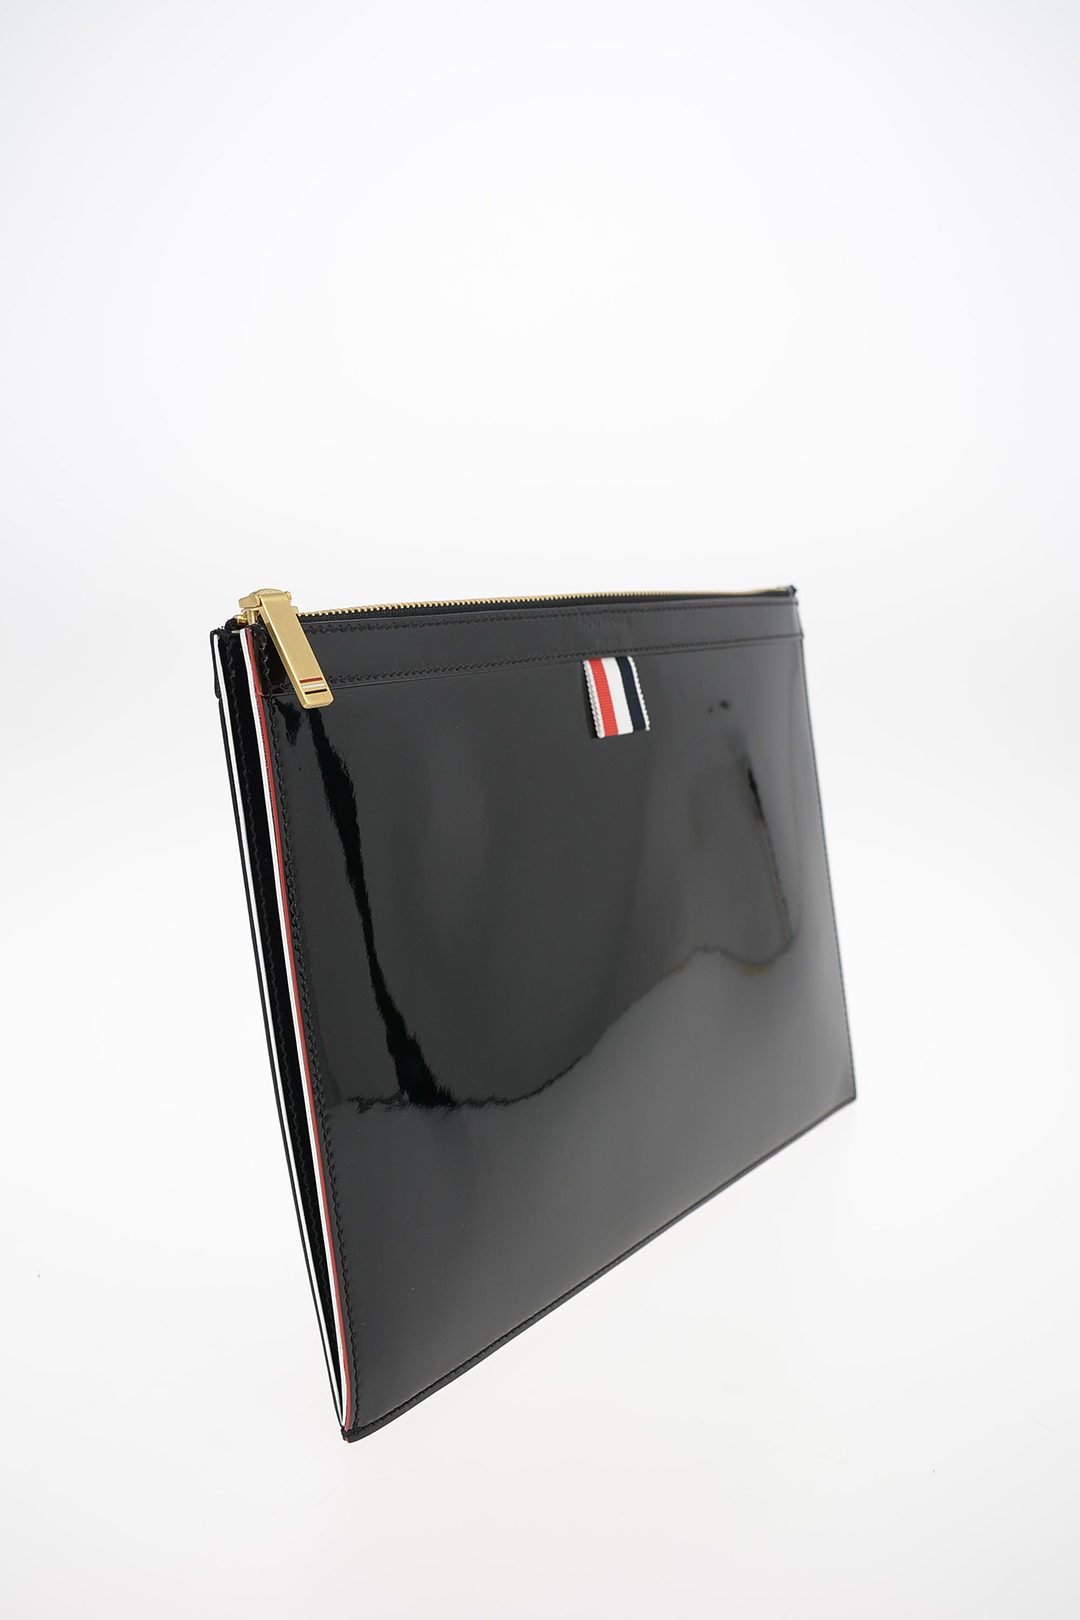 Patent Leather GUSSET Maxi Clutch